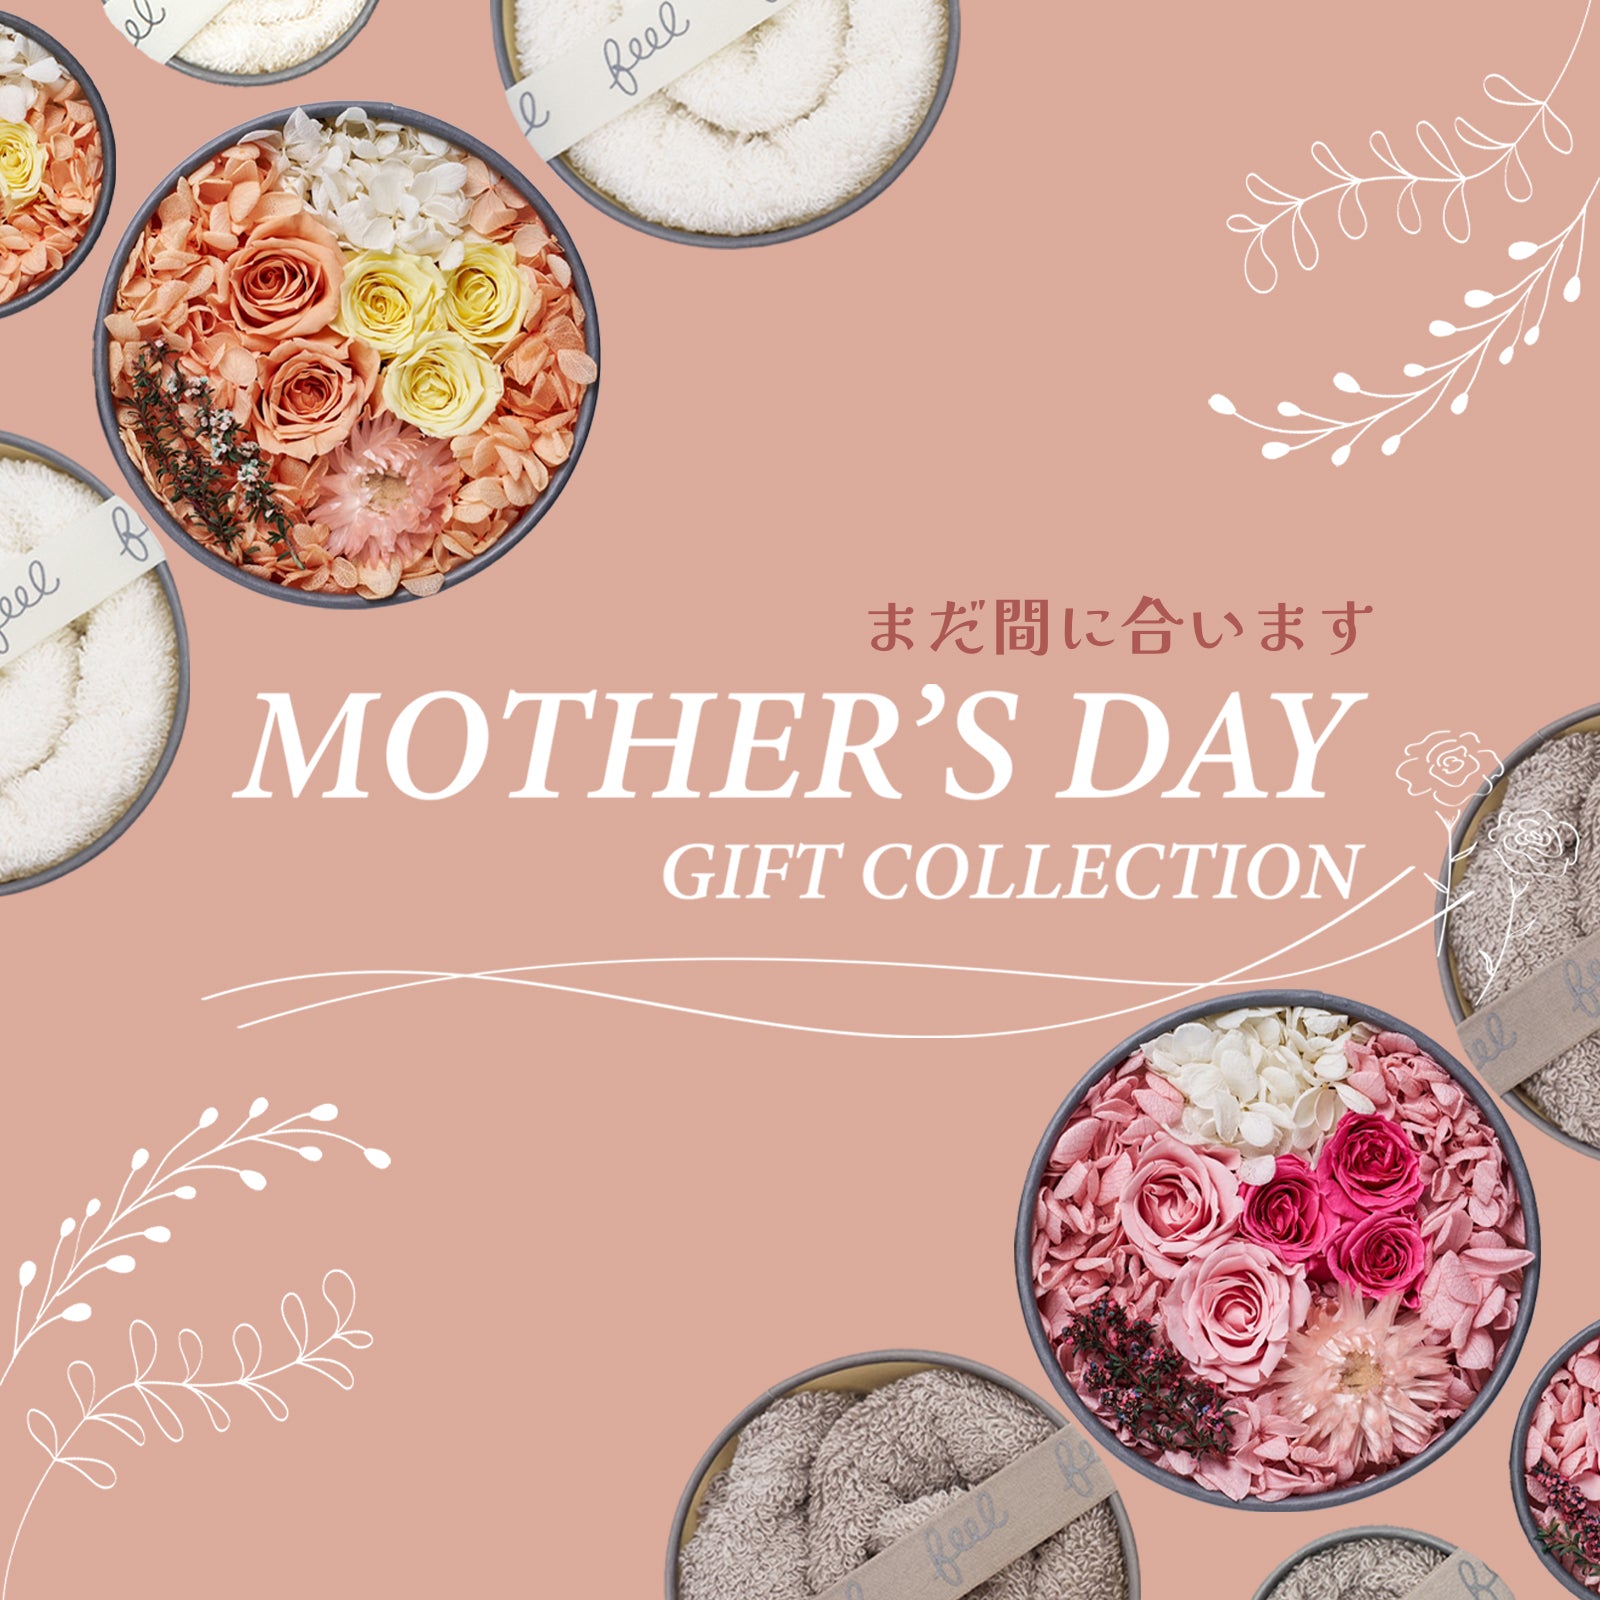 MOTHERS DAY GIFT COLLECTION -母の日ギフト特集-